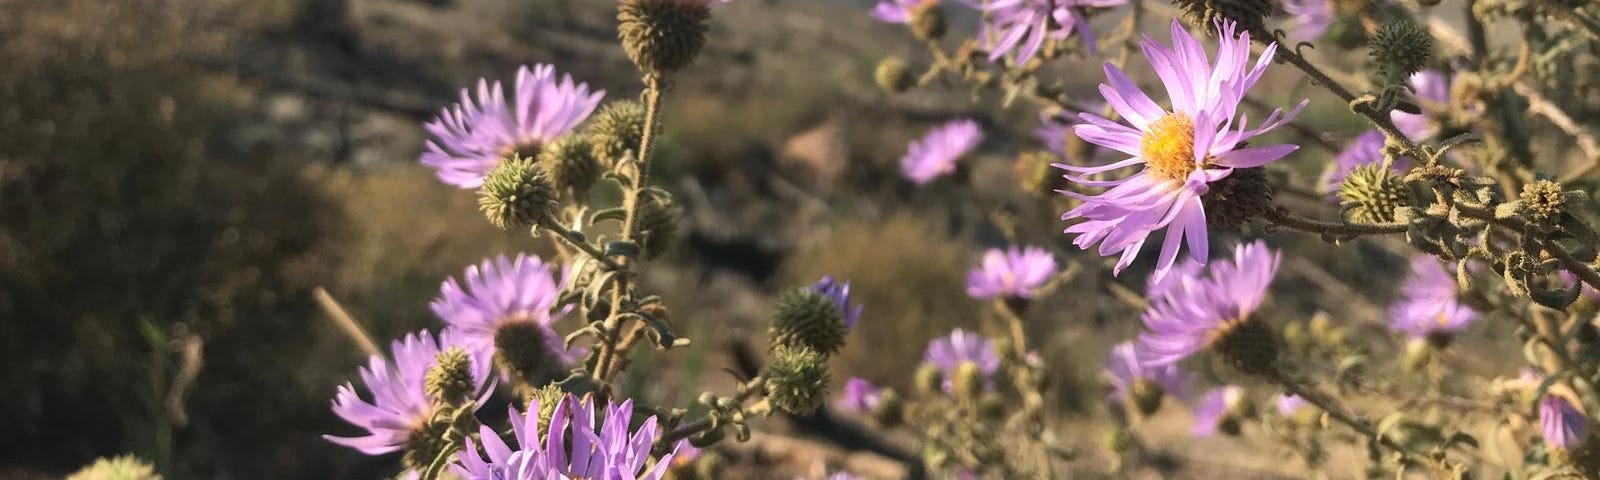 Lavender-colored wildflowers bloom in the wilderness.